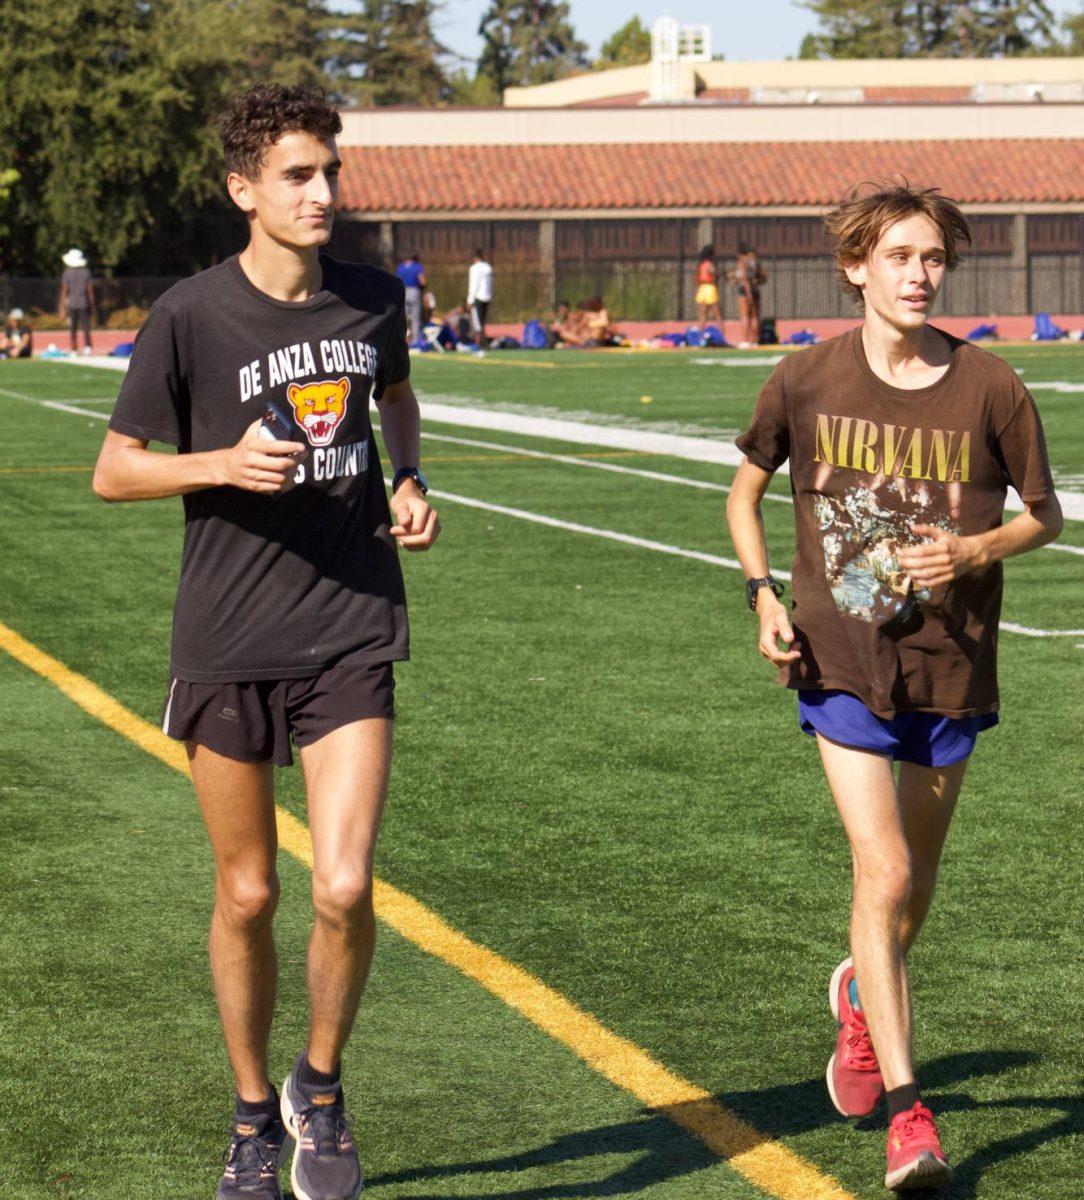 Student athletes Antoine Moret (left) and Elliot Daniels (right) are running a cool-down lap after running four miles at the track stadium on Monday, Oct. 23.